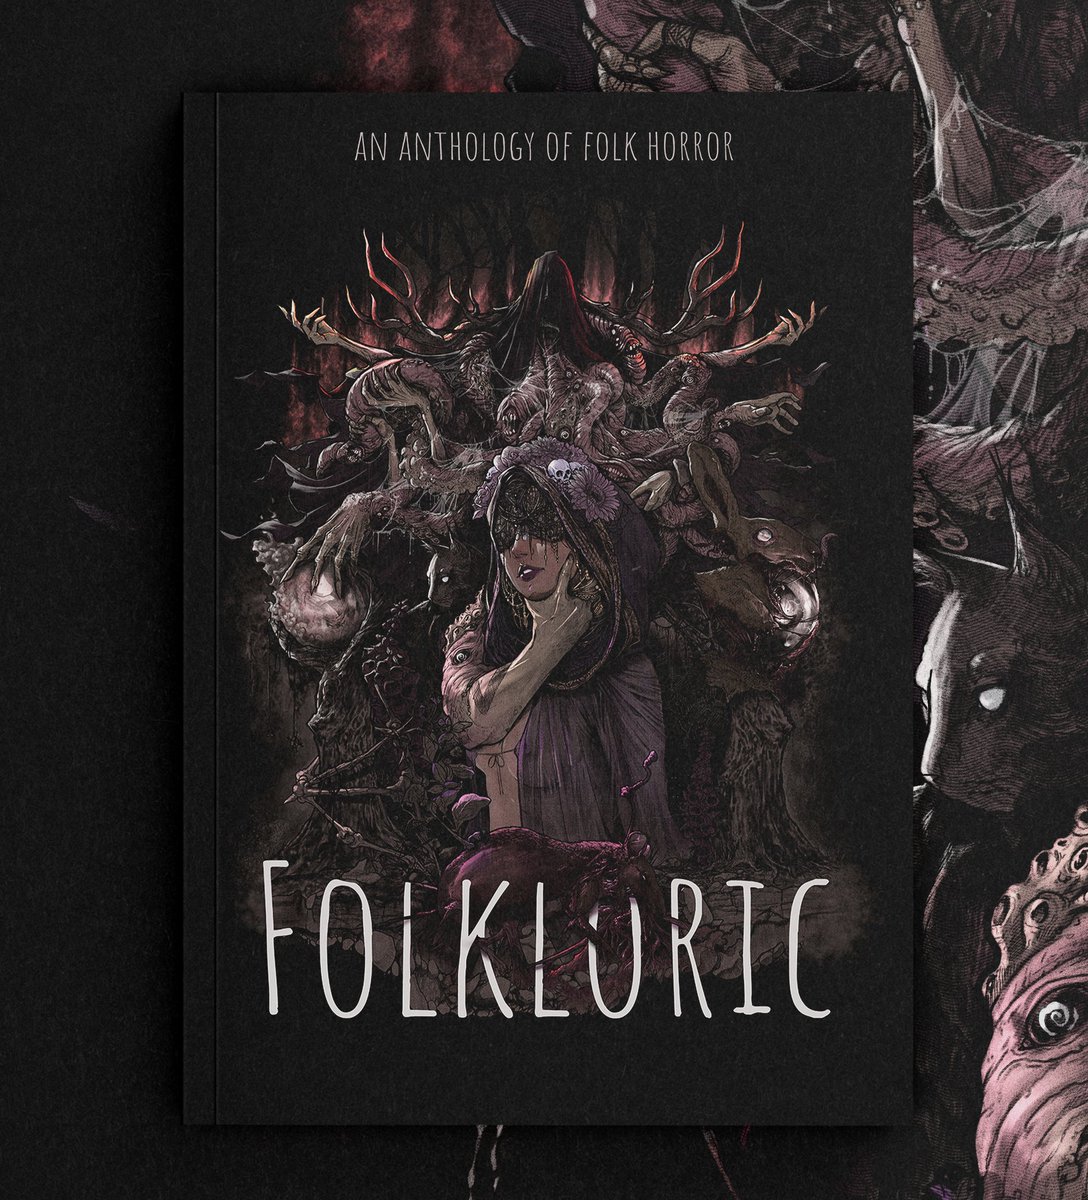 You can find FOLKLORIC on Amazon and Audible! Kickstarter copies are currently landing!